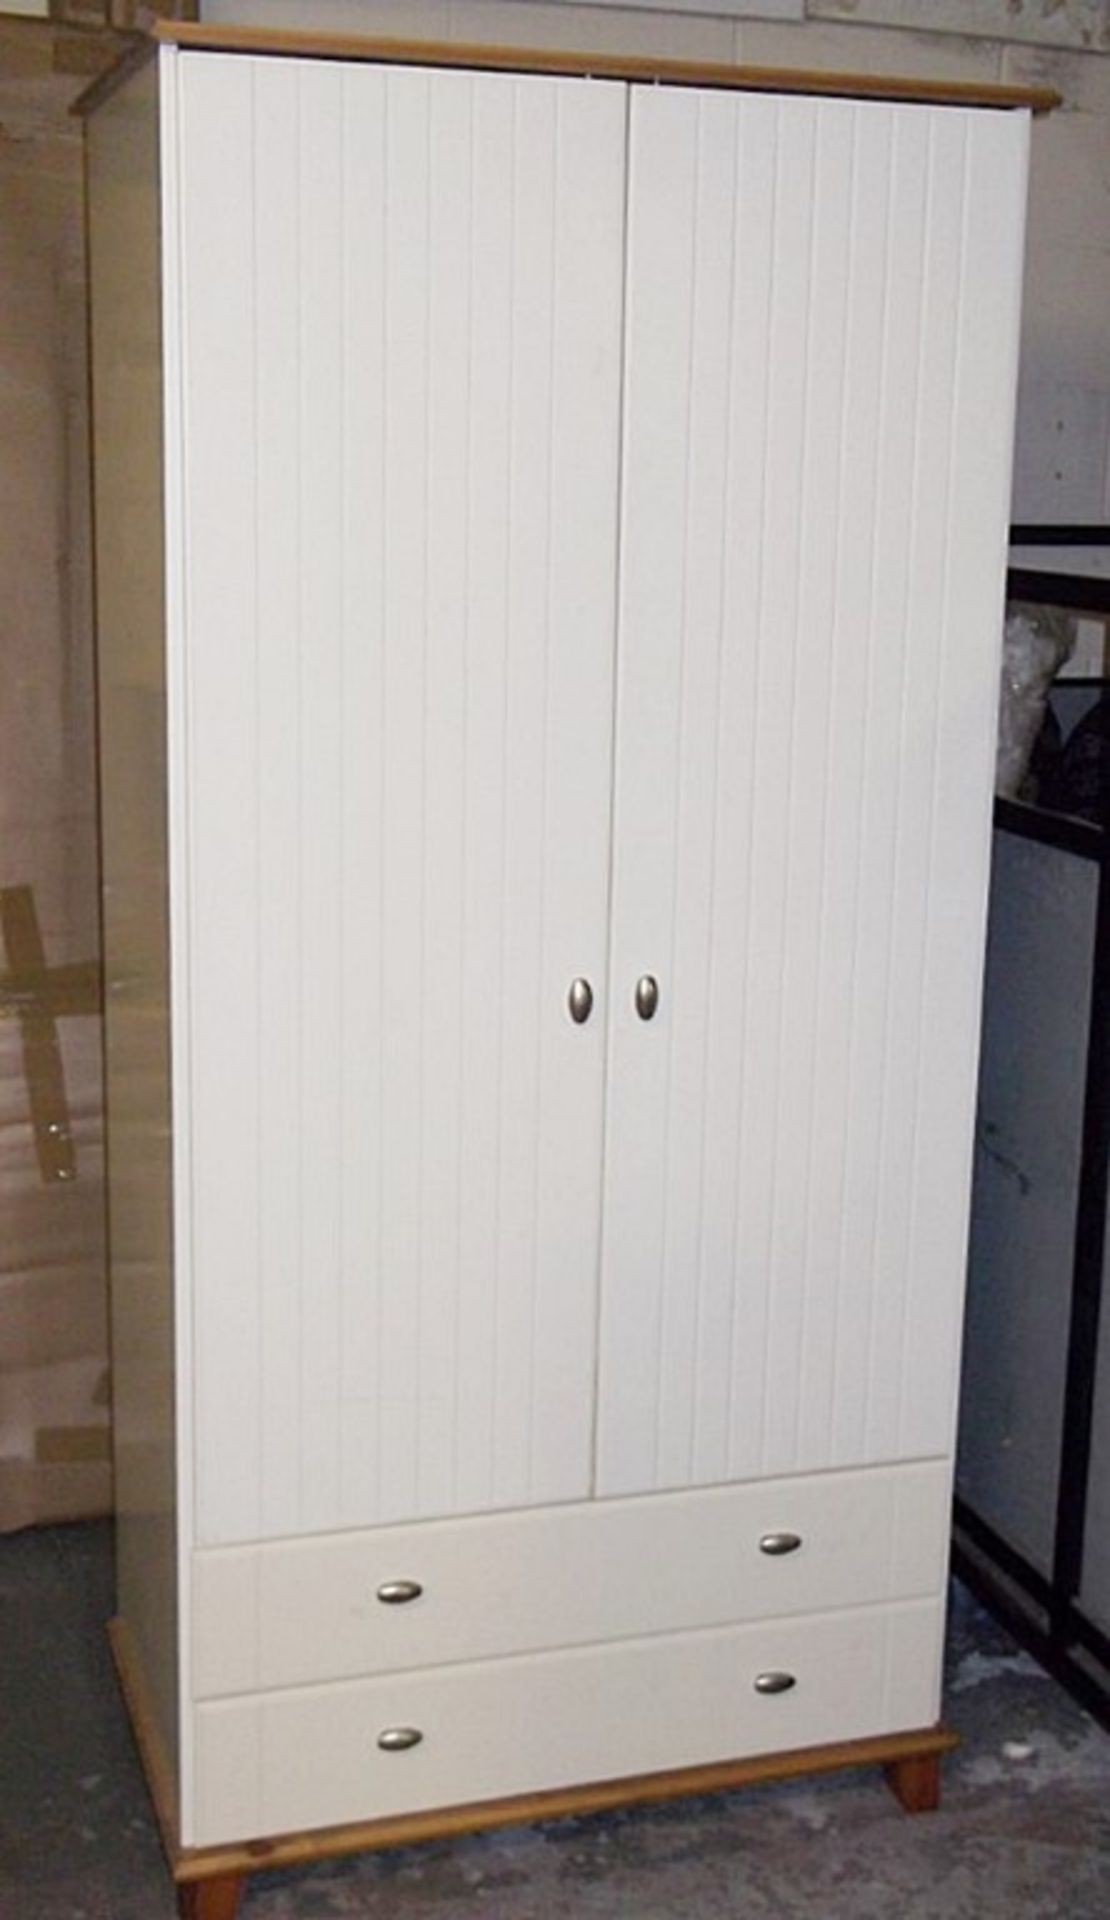 1 x Large Cream Wardrobe - 2 Door,/ 2 Drawer - Pre-Built - Pre-owned, In Good Condition - H181 x W81